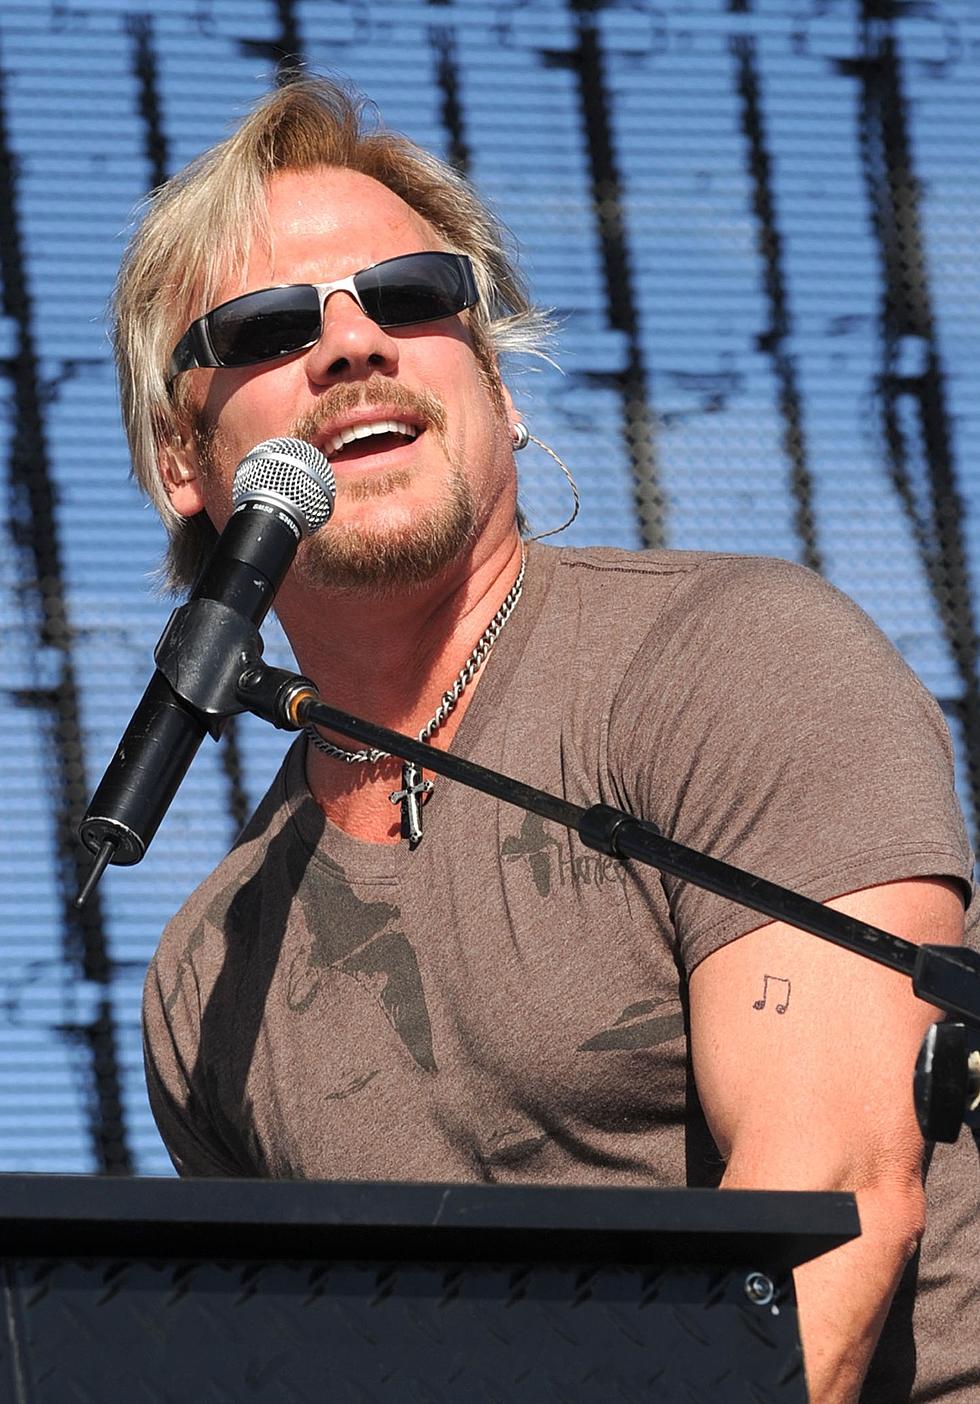 What’s Your Favorite Phil Vassar Song?